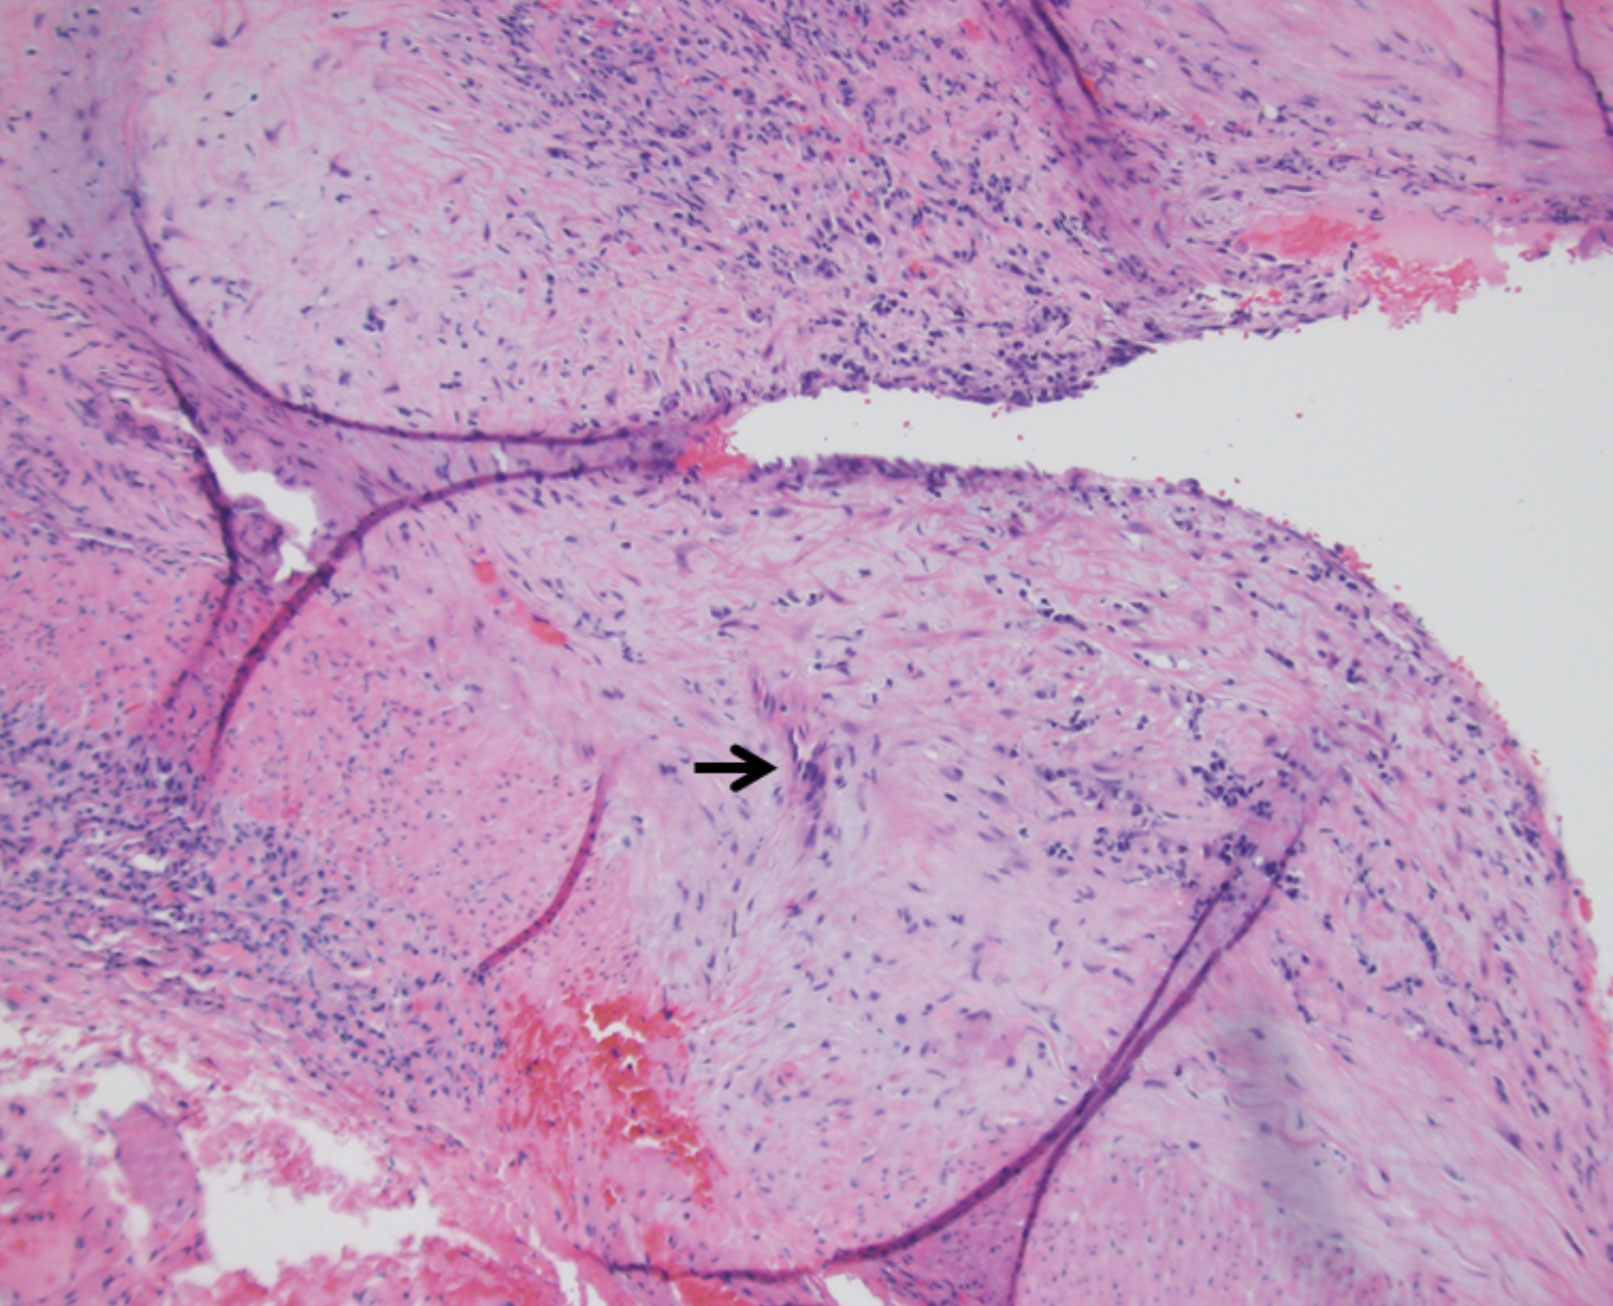 Fig. 5. Histology shows a specimen affected by temporal arteritis (the arrow indicates a multinucleated giant cell).